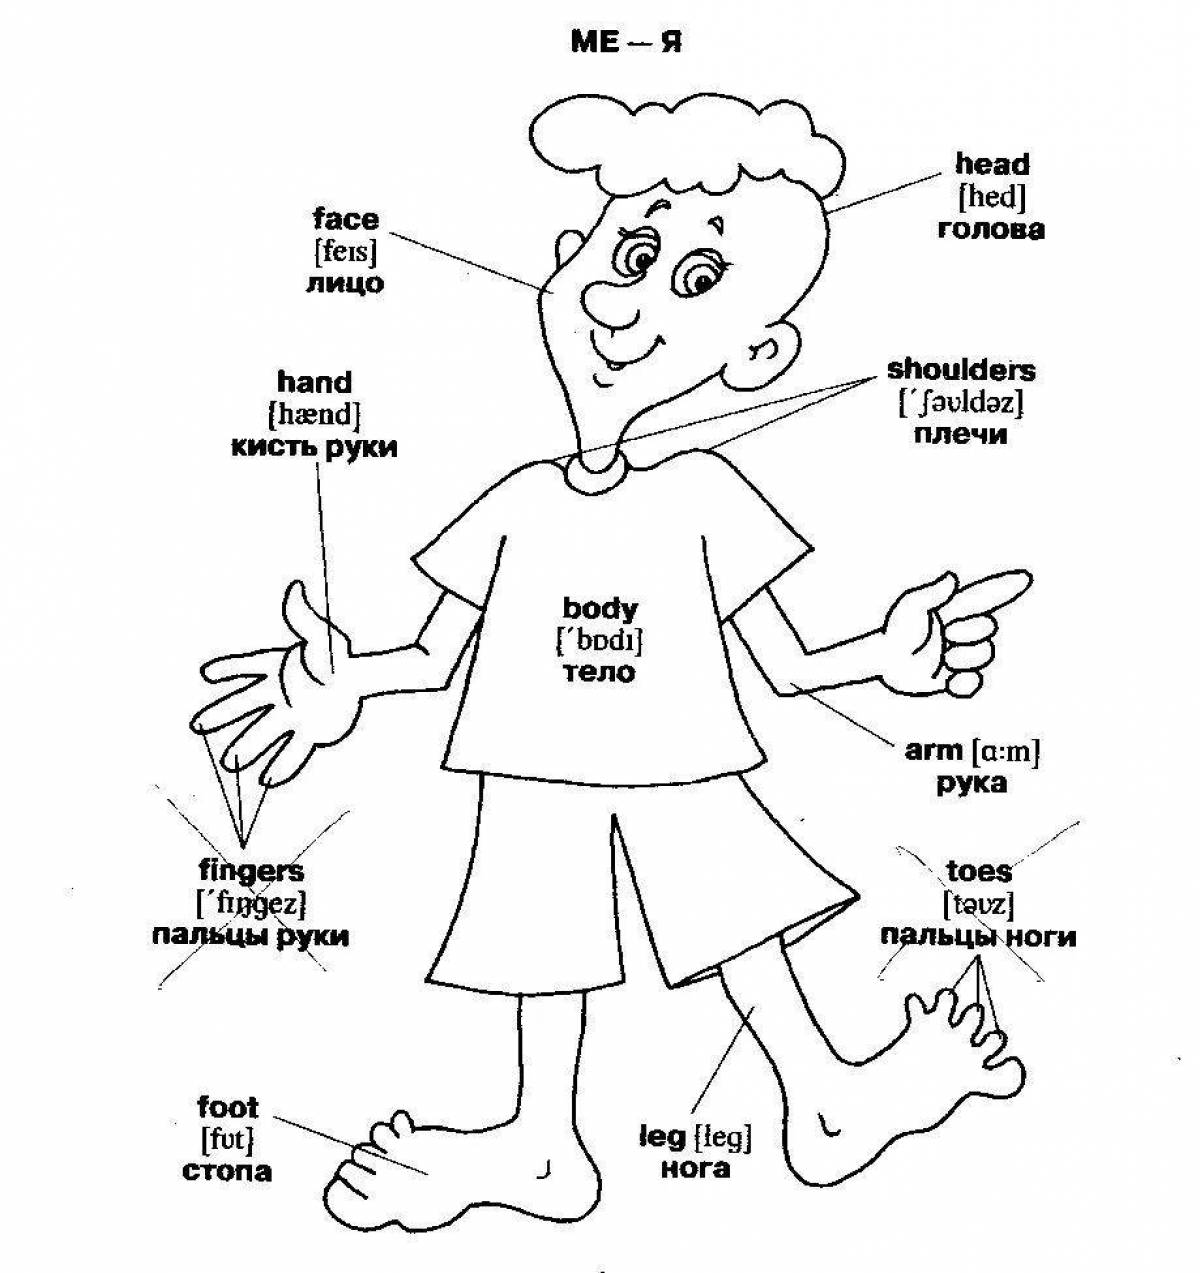 Exciting coloring pages of body parts for kids